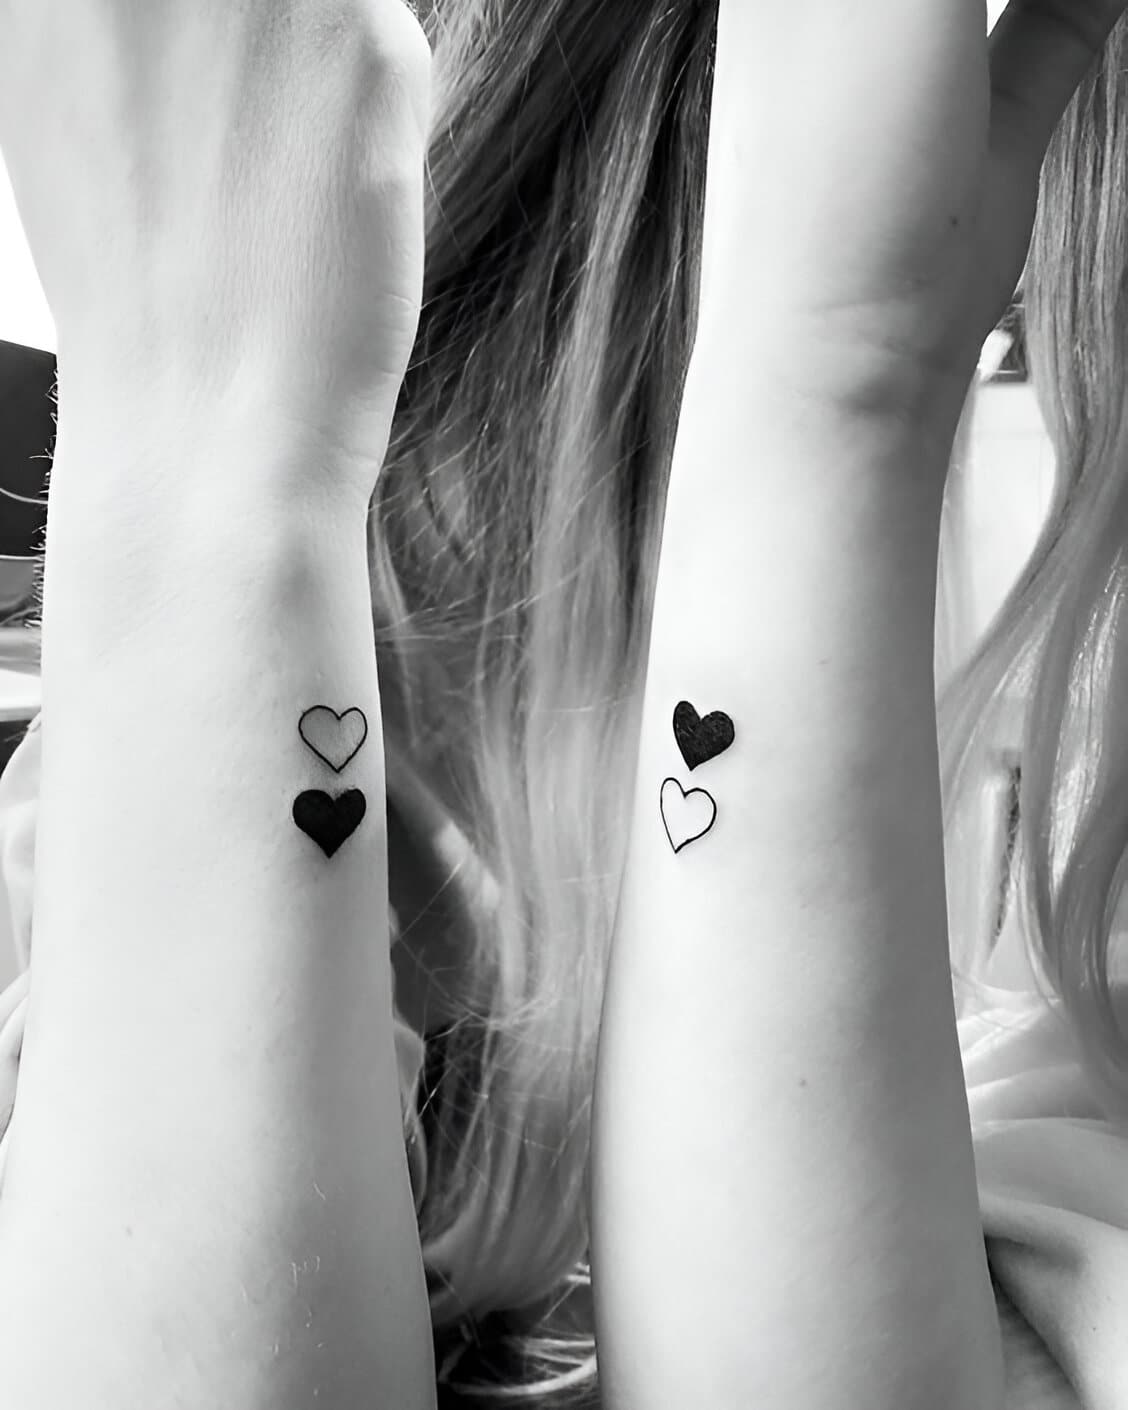 30 Elegant Matching Heart Tattoos To Get With Your Partner ASAP 28